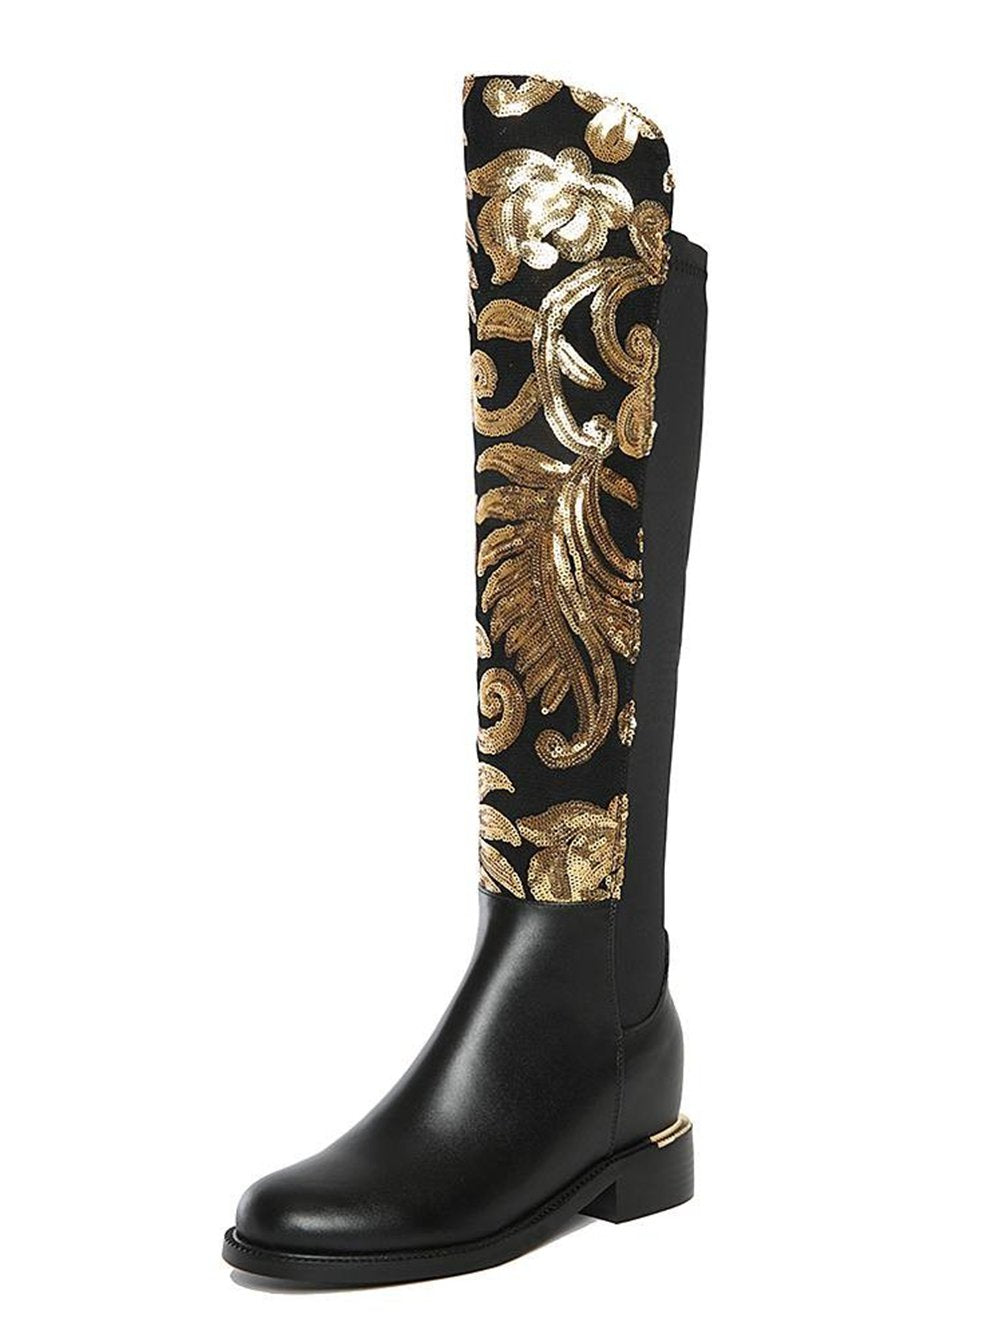 Glittery Fern Knee-High Faux-Leather Boots